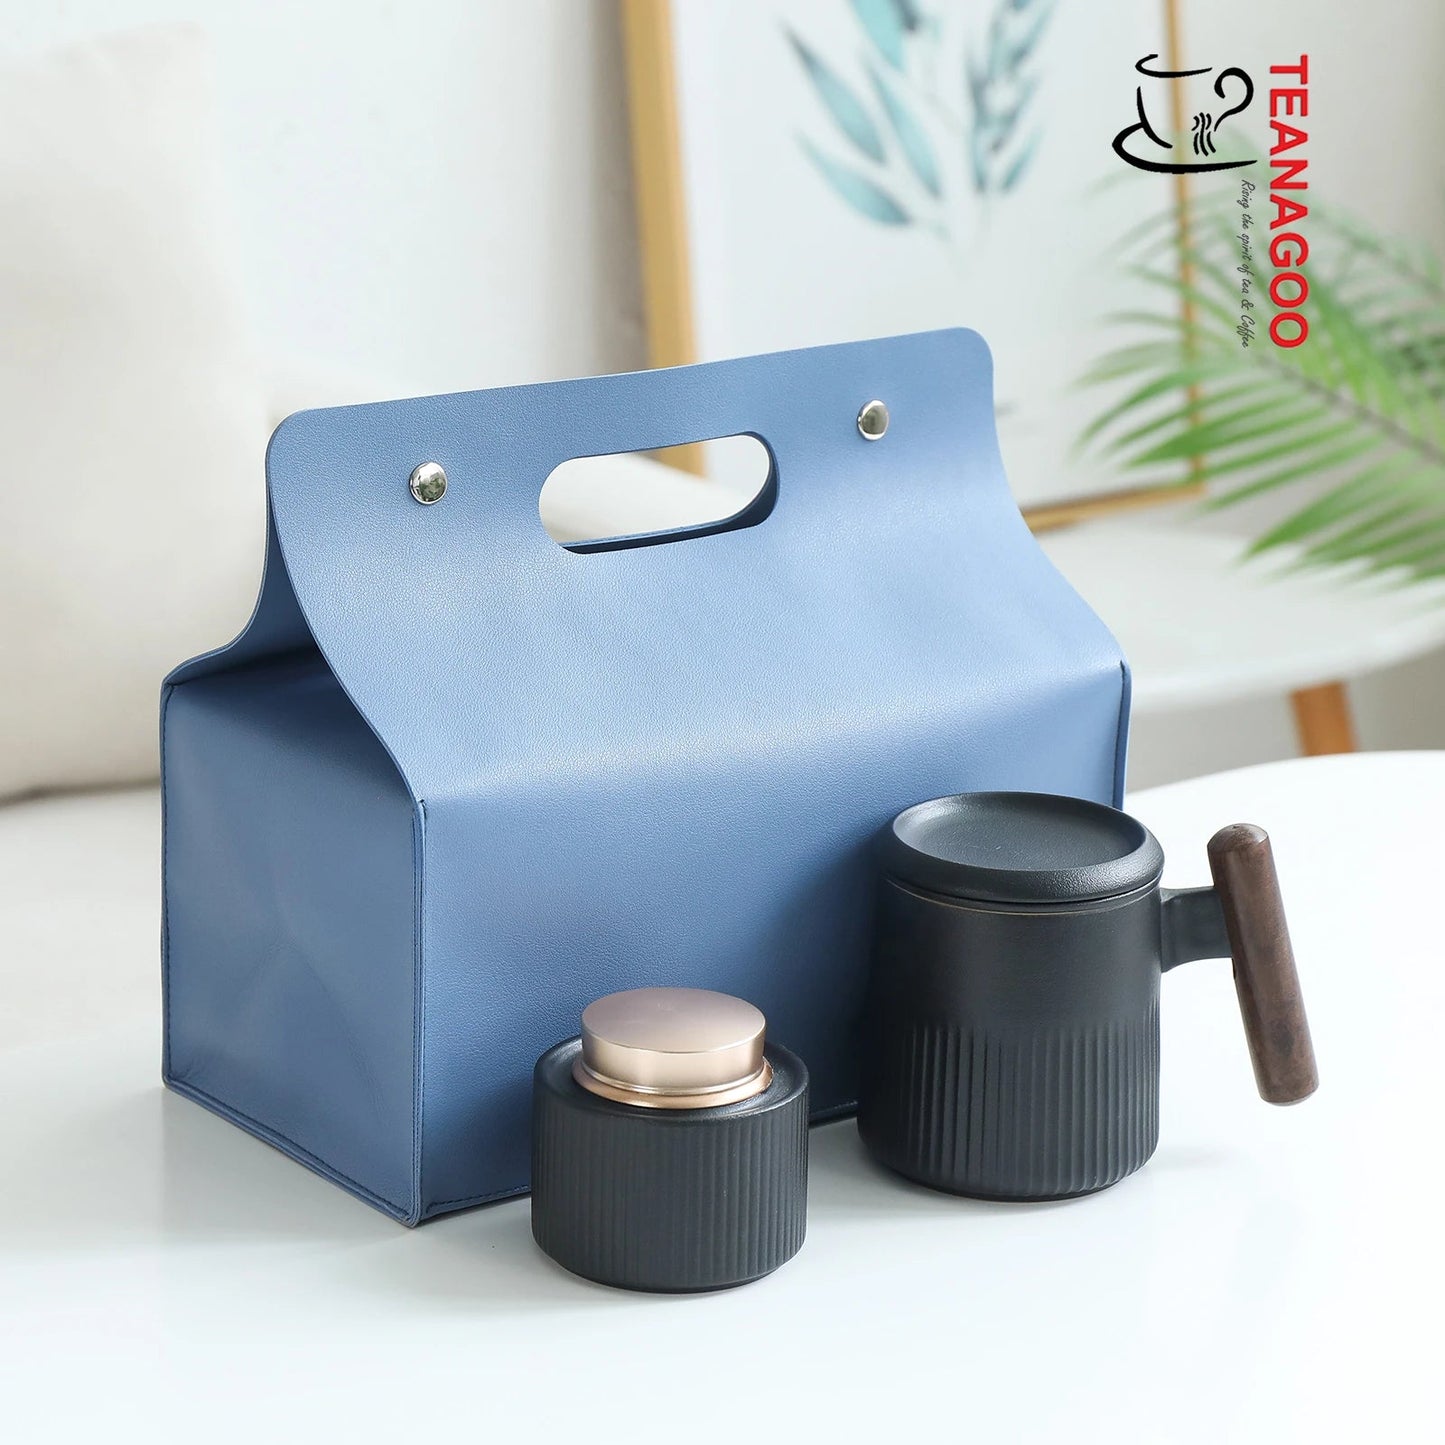 Ceramic Tea Brewing Mug with Tea Canister, Luxury Gift Packing, 340ml/12oz